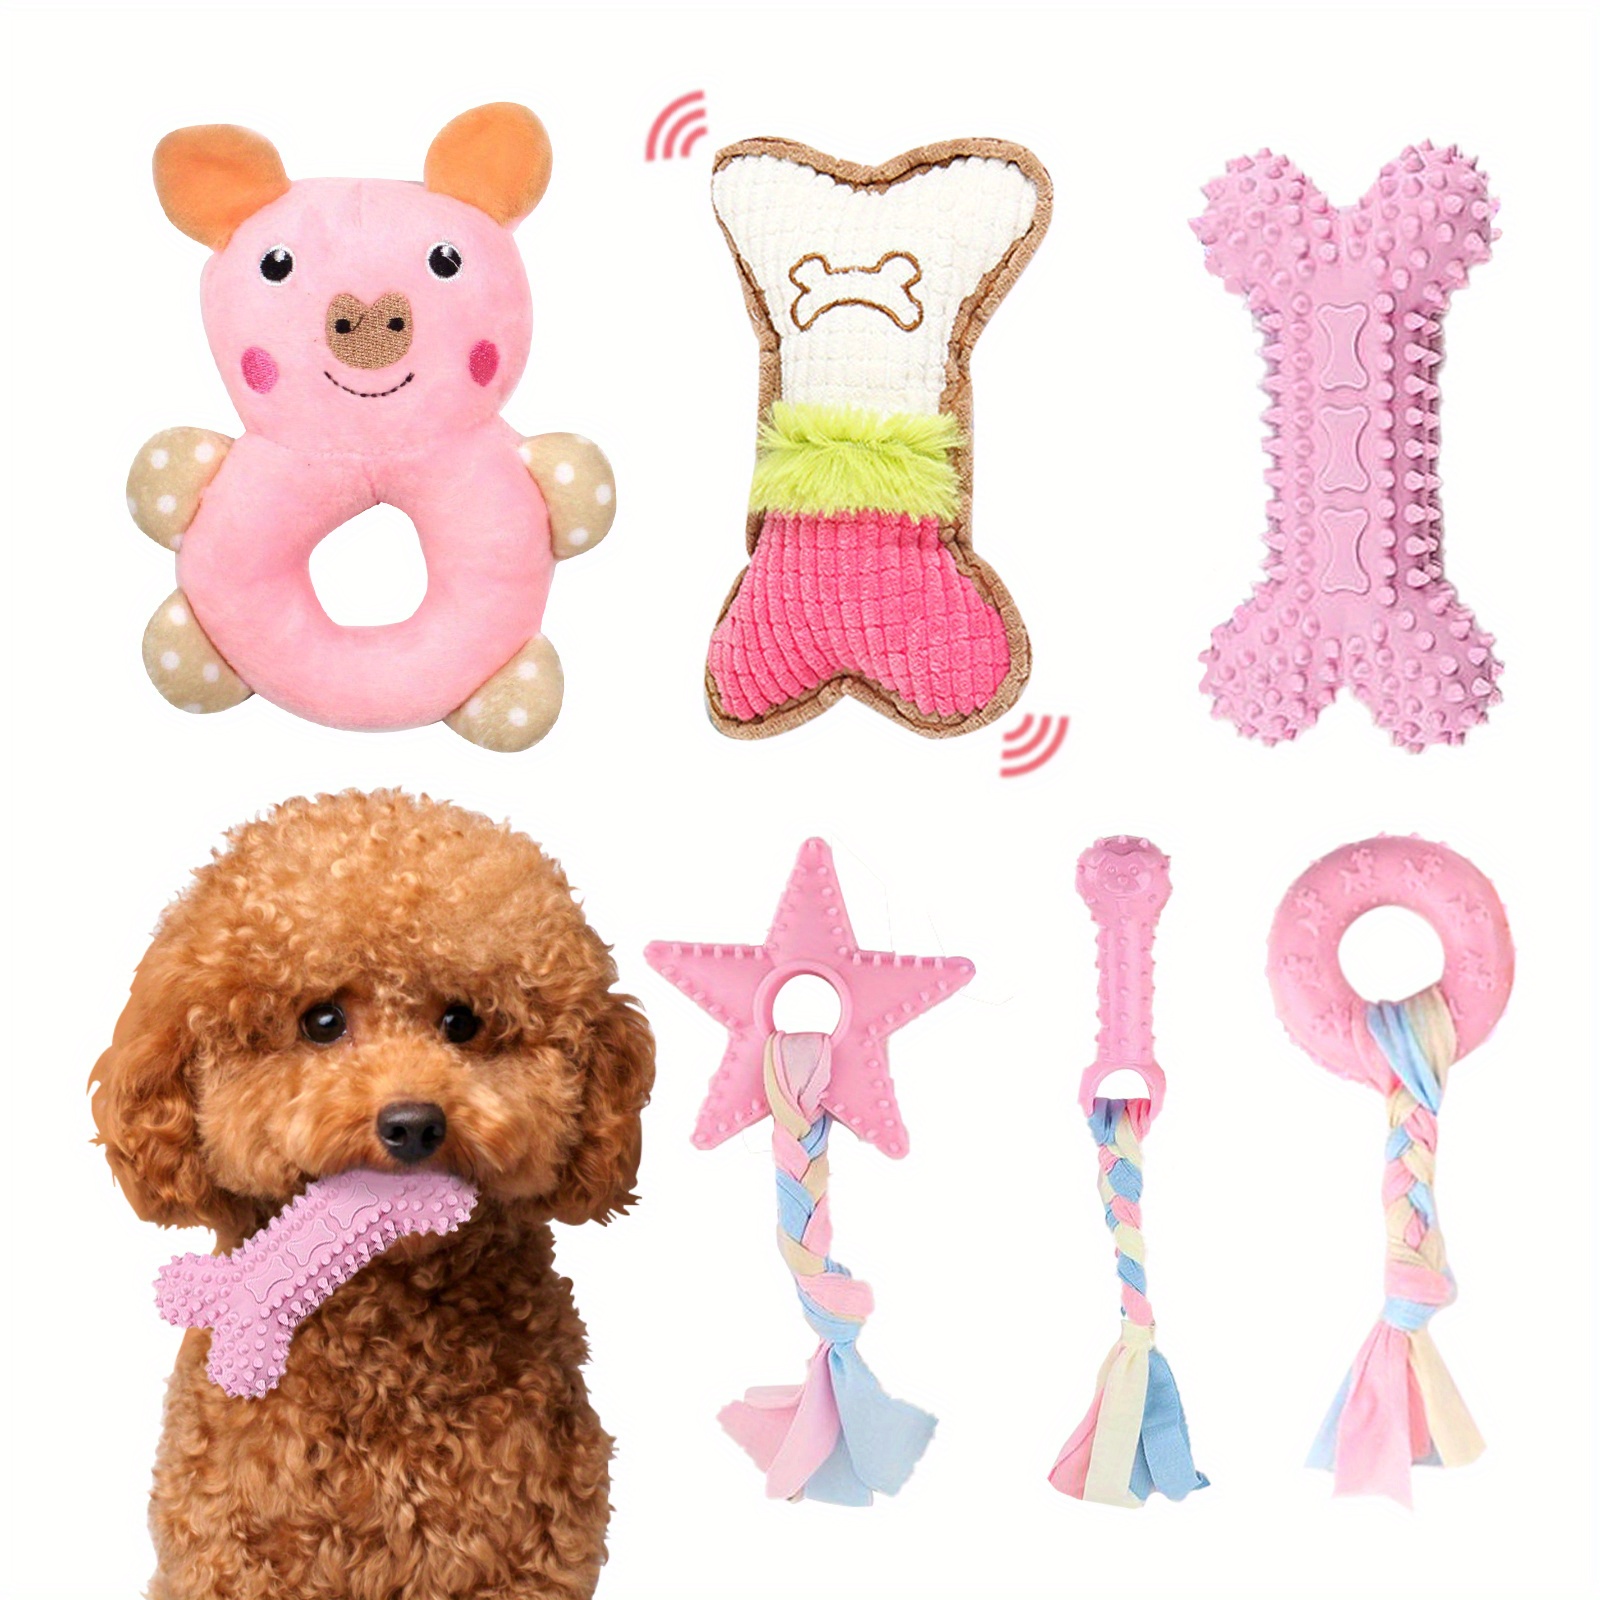 4 cute but durable plush dog toys that you can get for your bored, teething  pup -  Deals